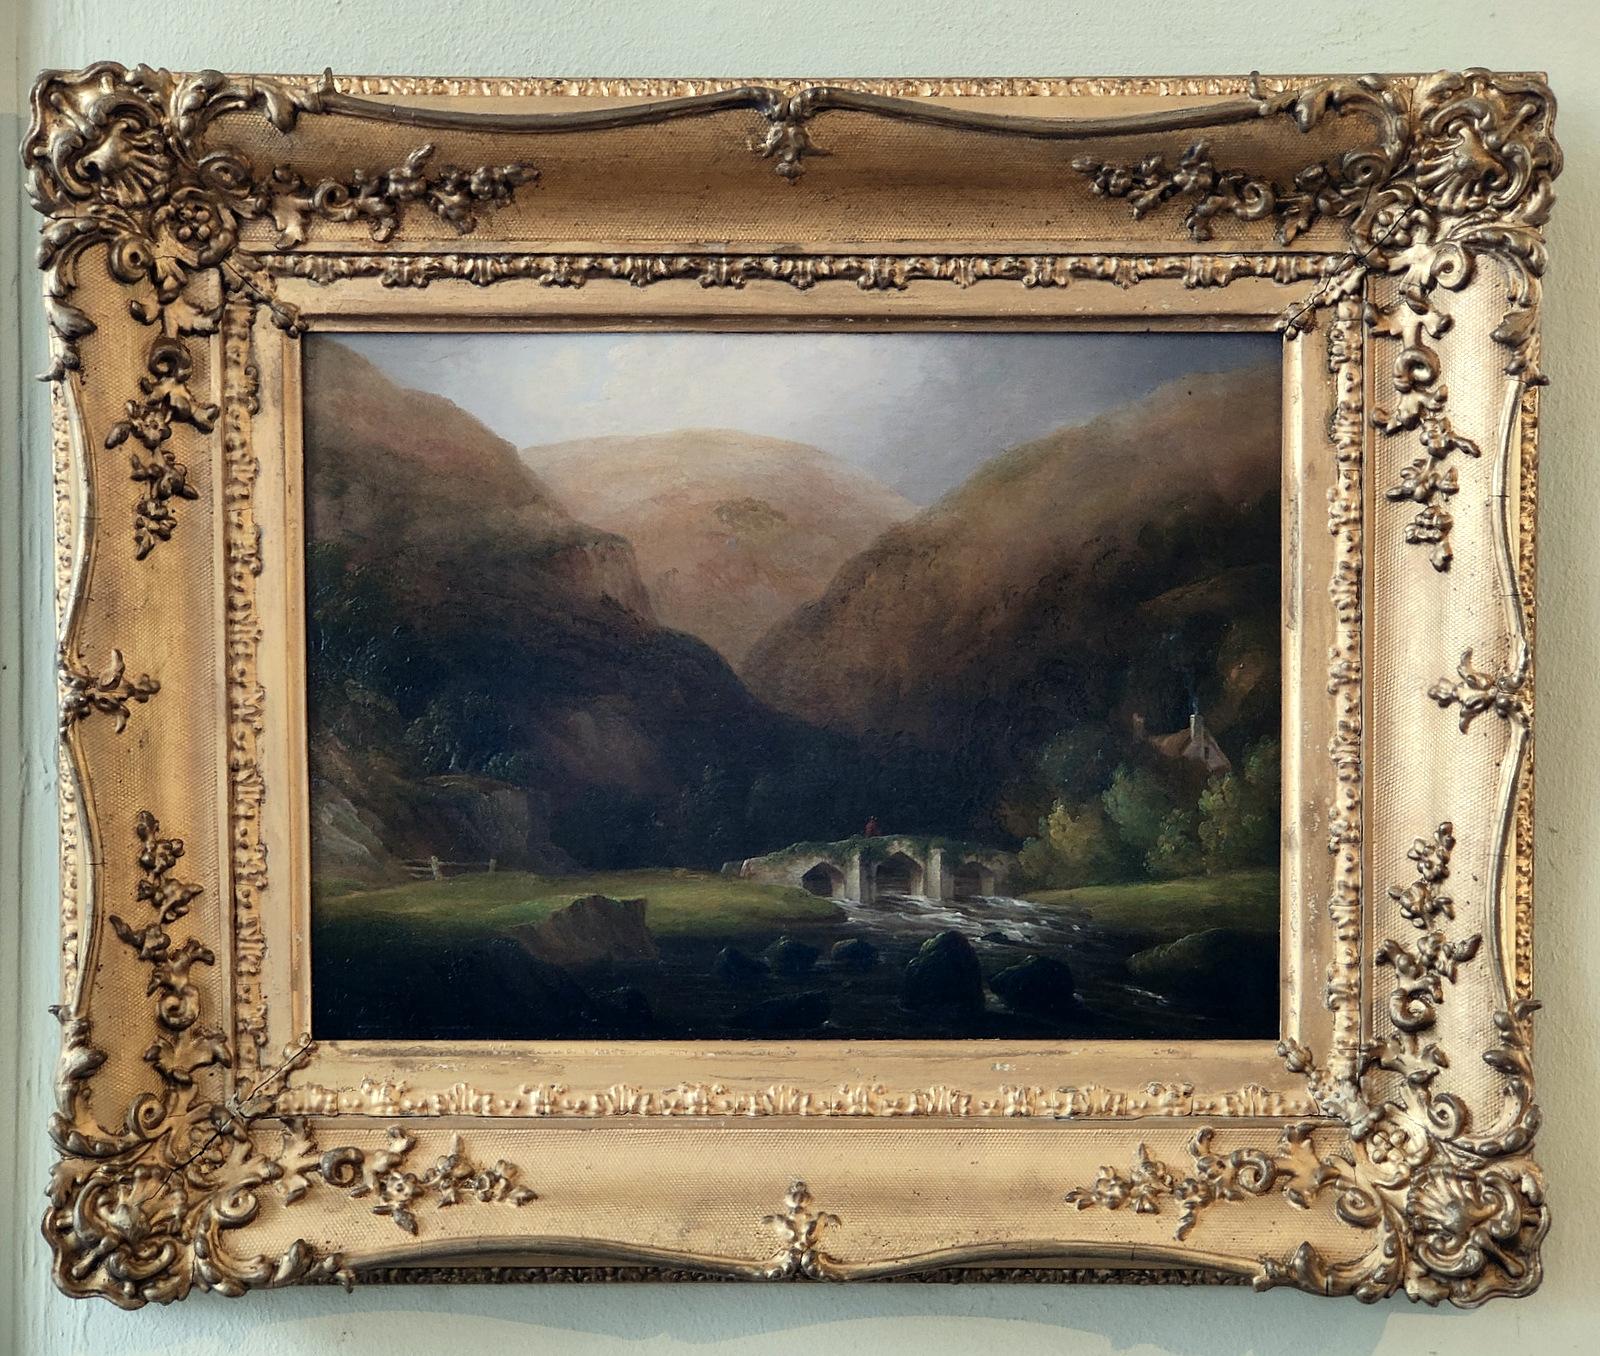 Oil Painting by John Wallace Tucker "Fingle Bridge on the Teign" 1808 -1869 Tucker was an Exeter artist with a studio in Bartholomew yard. Painted local views. Oil on Panel. Signed, inscribed dated 1840 verso

Dimensions unframed:
height 9" x width